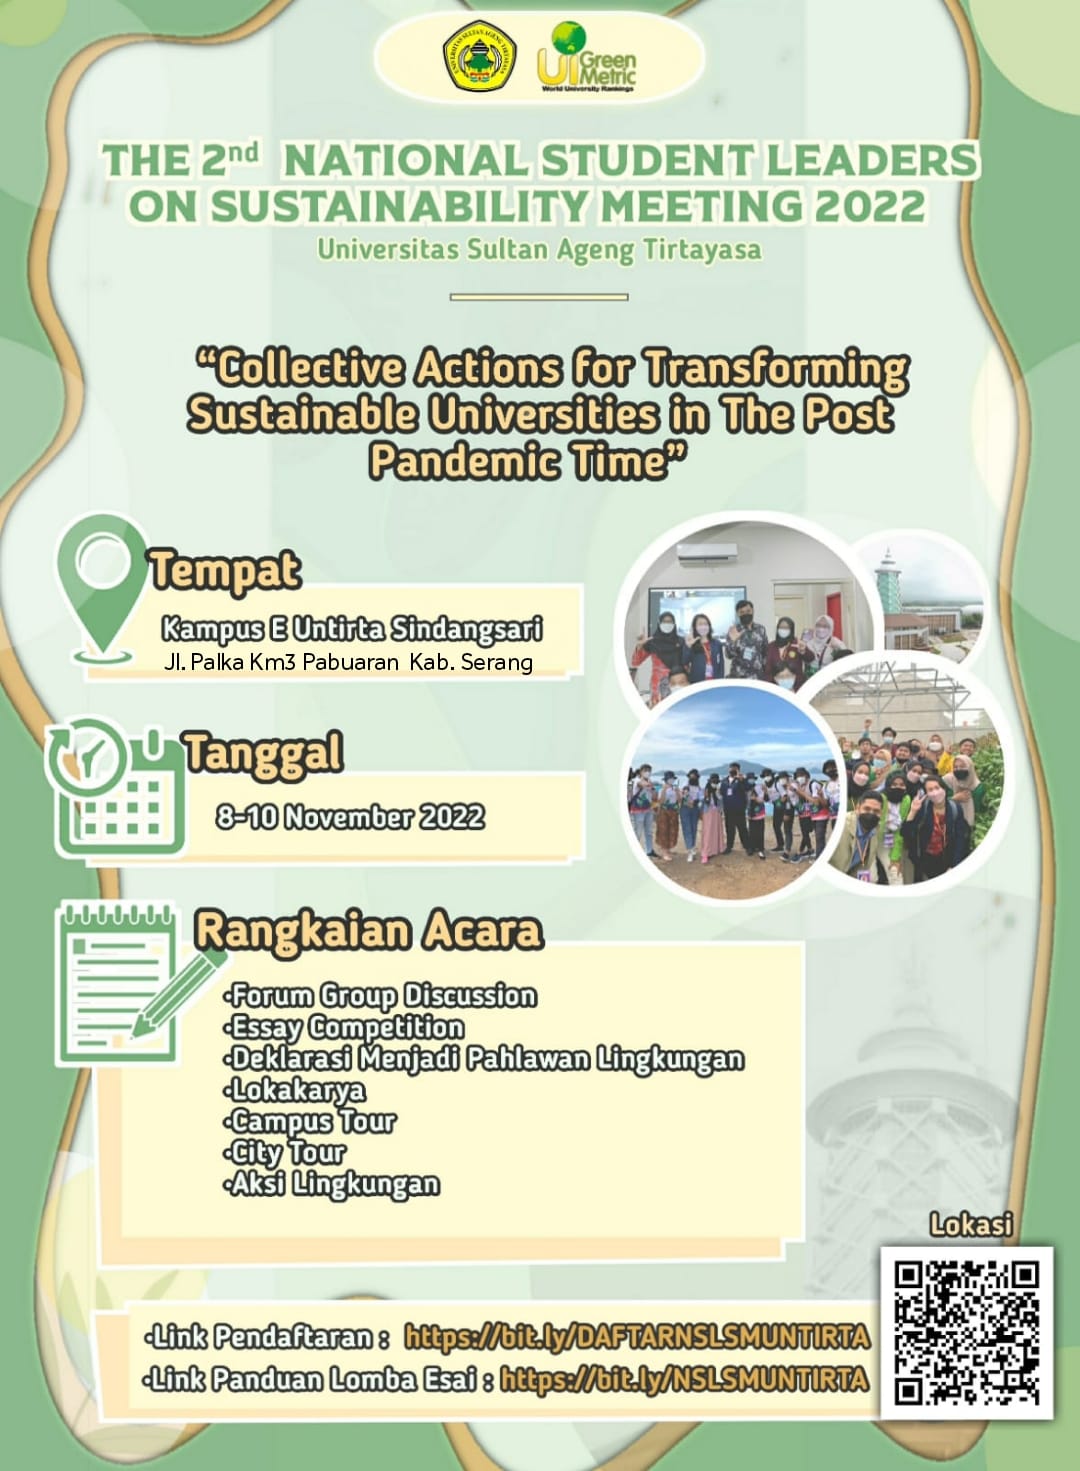 The 2nd National Student Leaders on Sustainability Meeting 2022